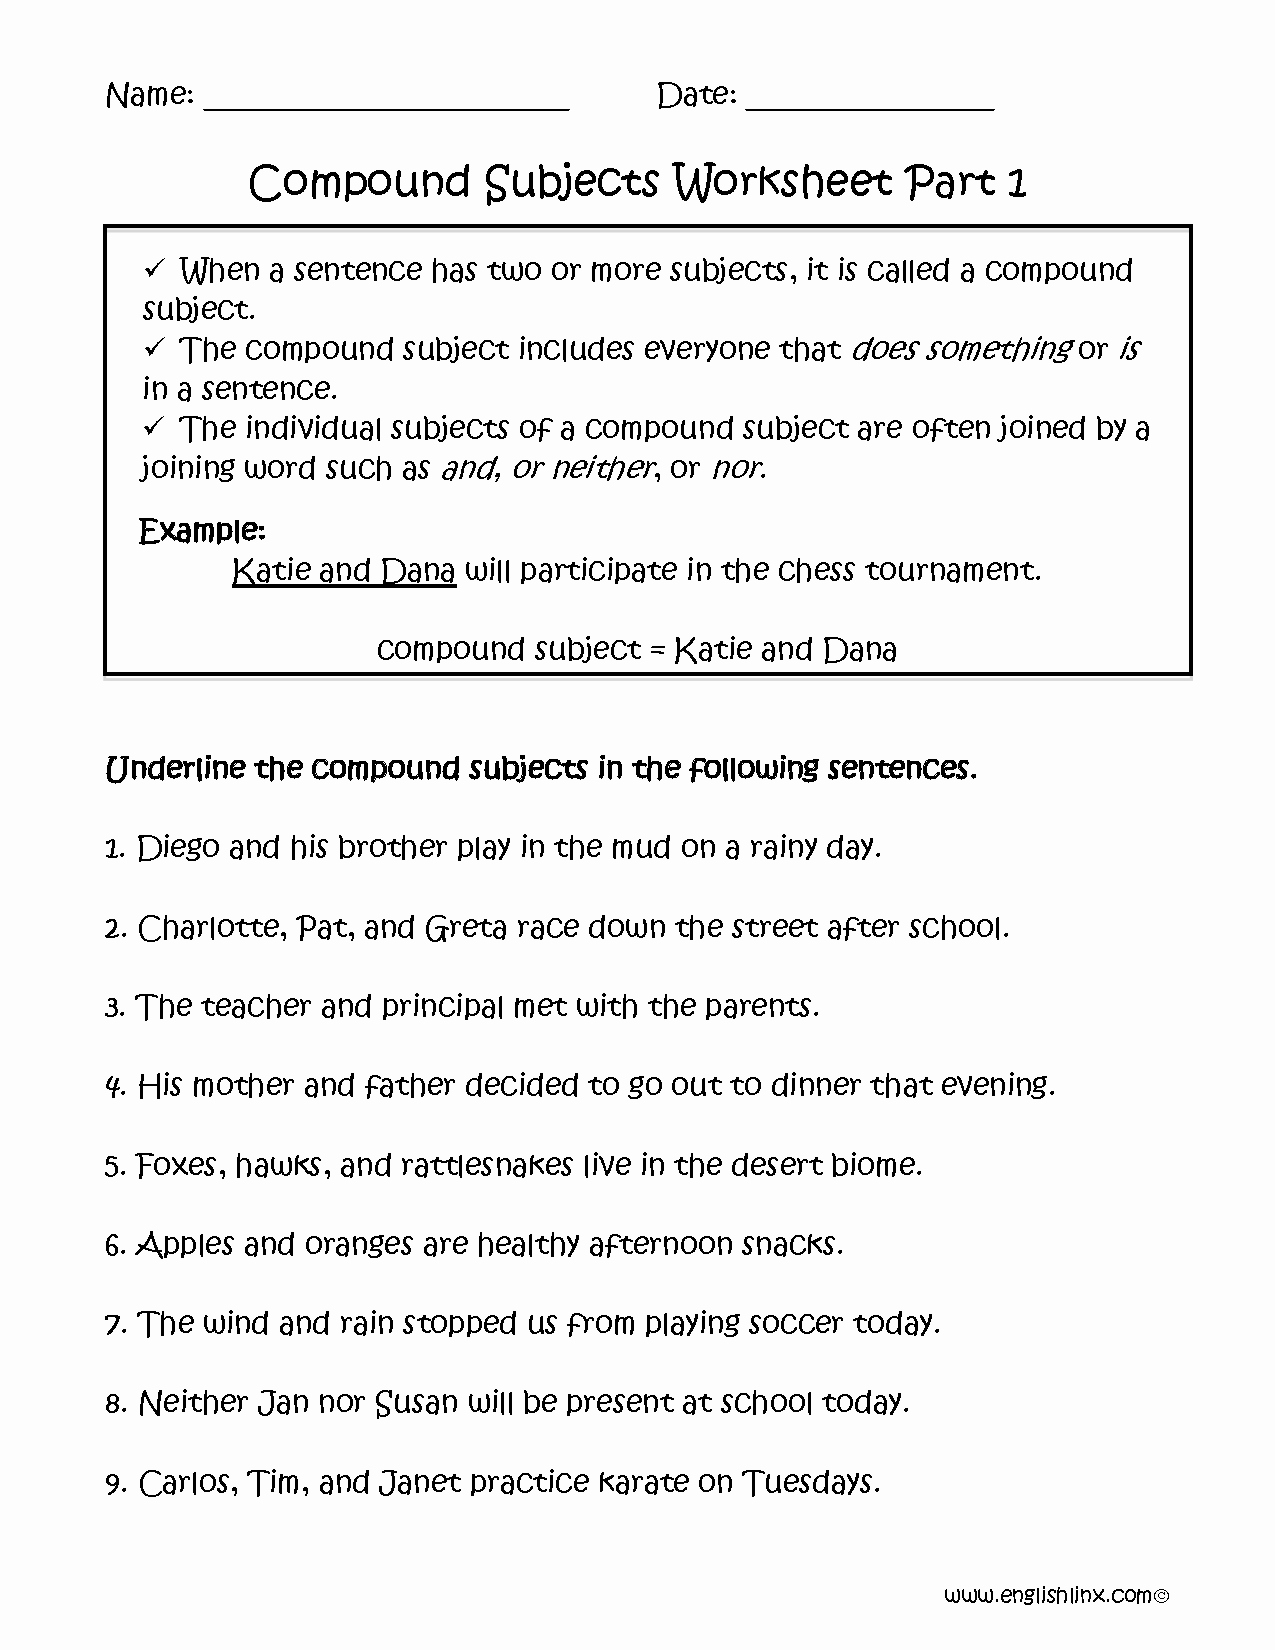 Compound Sentences Worksheet with Answers Awesome Pound Subject Worksheet Part 1